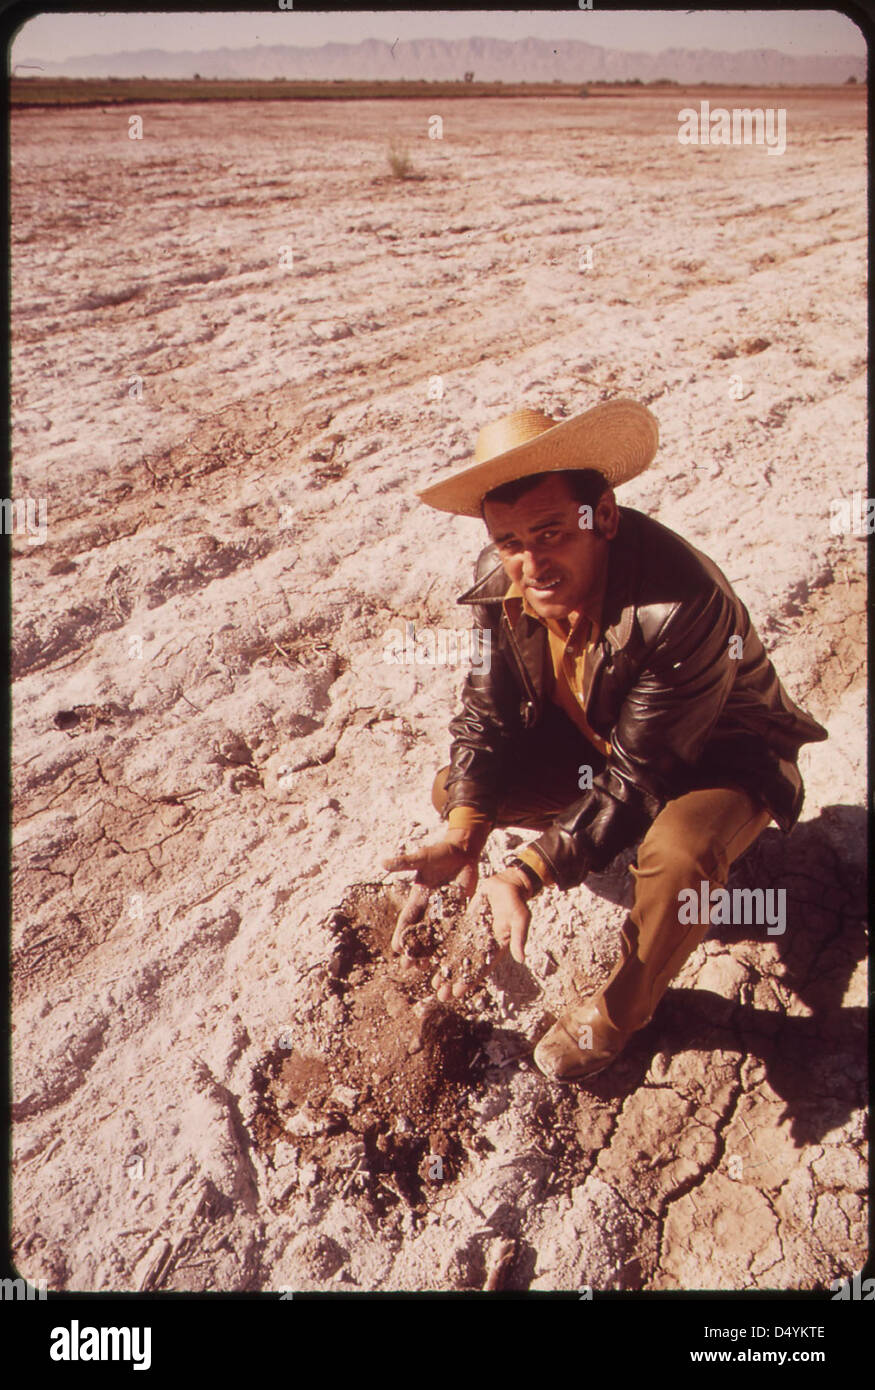 Poor soil, damaged by accumulated salt, is examined by Mexican farmer, Gilberto Buitierrez Banaga, near Mexicali, Mexico. Mexicans want better quality water from Colorado River. Presently salt content is extremely high at Mexican border, May 1972 Stock Photo